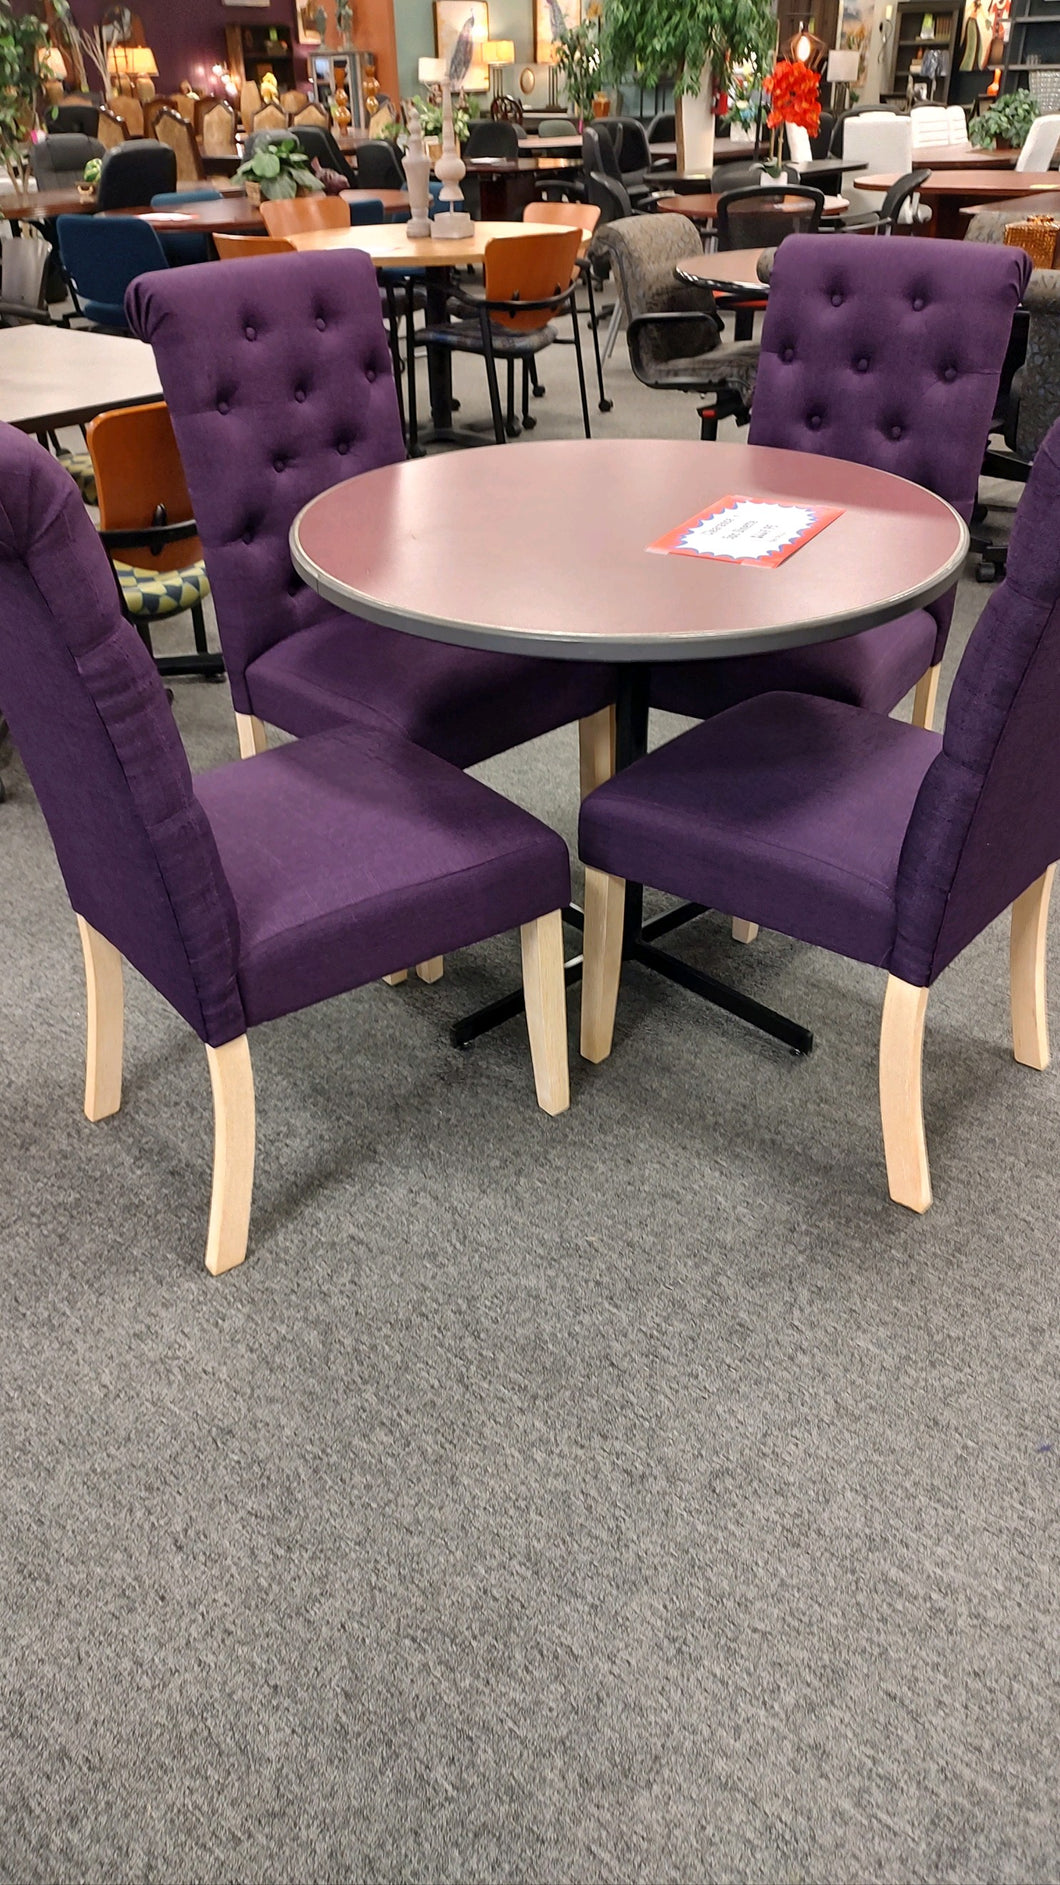 R4141 5pc Purple Round Table w/4 Chairs $449.95 - 1 Only!